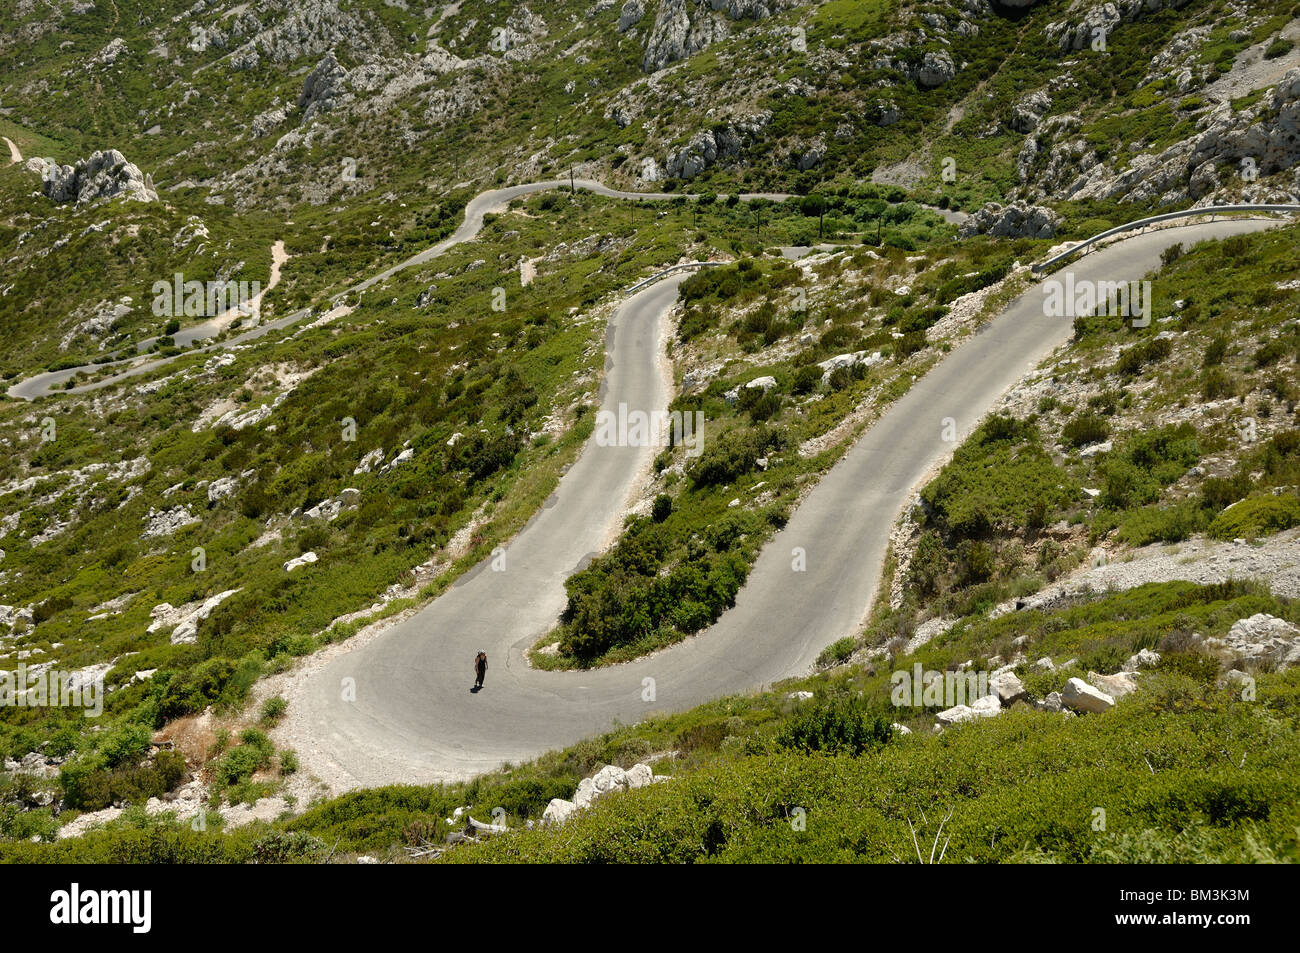 Hairpin Bend, Hairpin Turn or Hairpin Corner & Winding Road Leading Down to Sormiou Calanque in the Calanques National Park near Marseille France Stock Photo